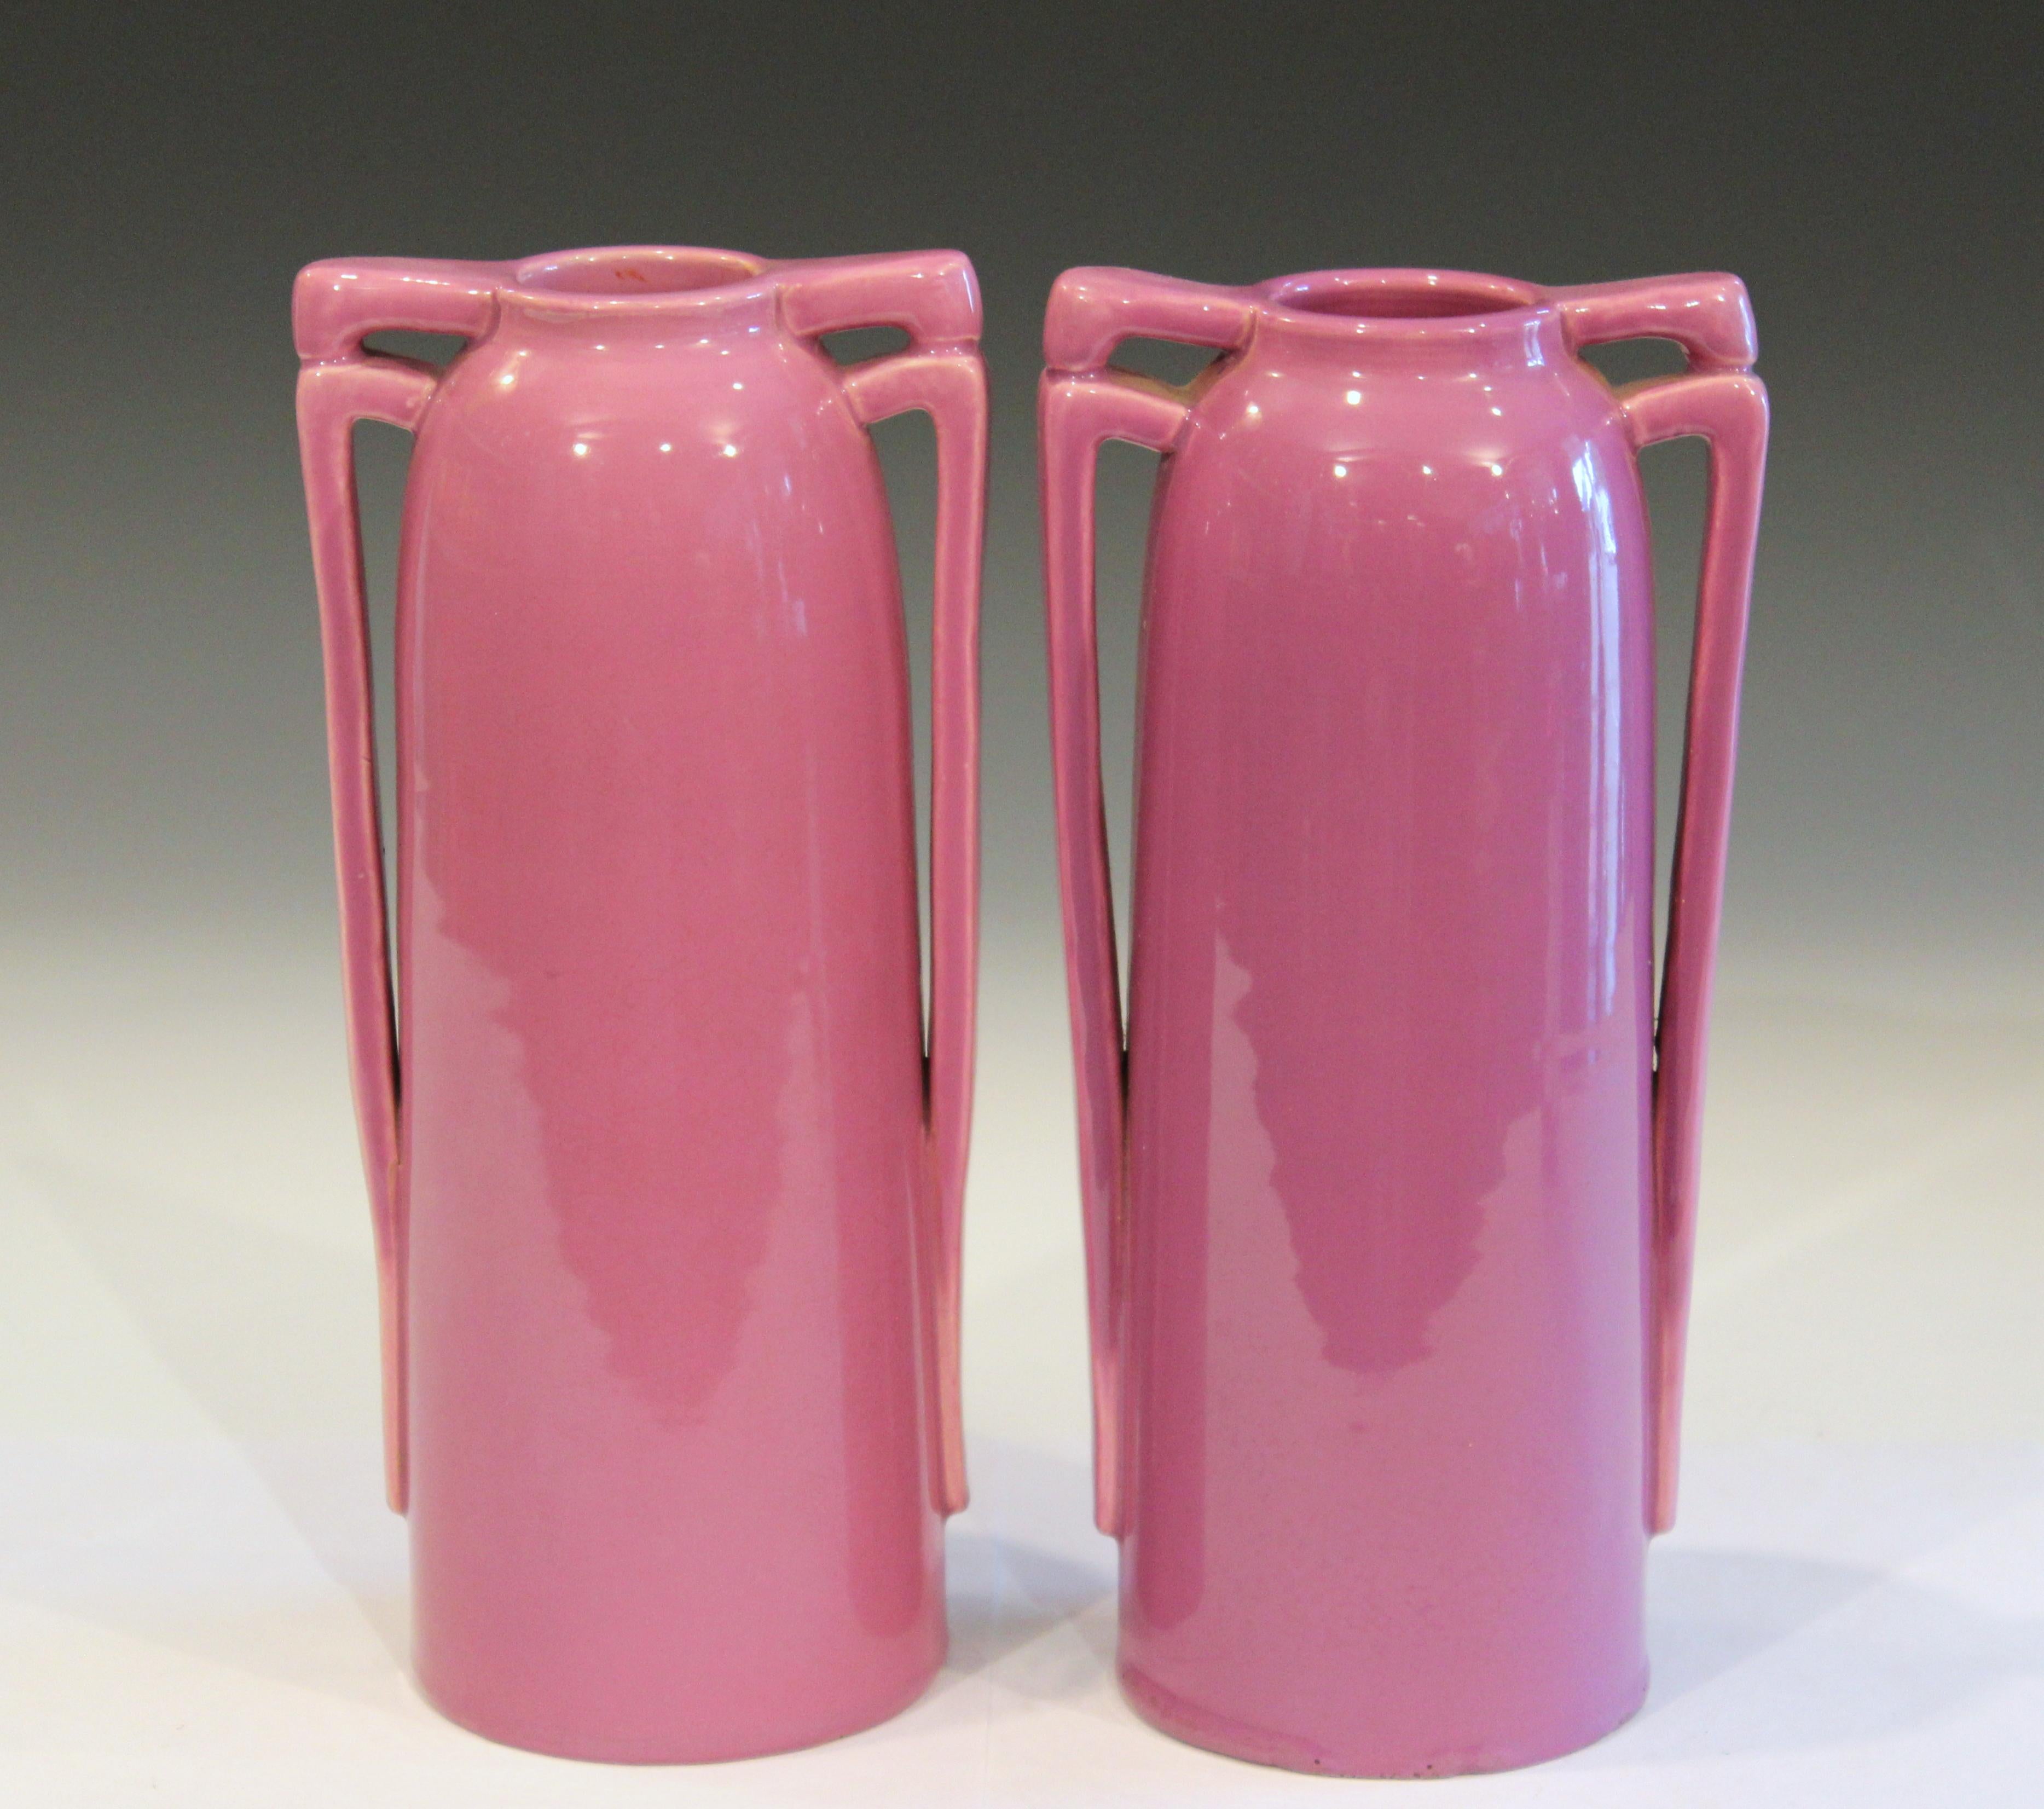 Pair of Awaji pottery vases with interesting double squared buttress handles and striking Art Deco pink glaze, circa 1930. 9 3/4